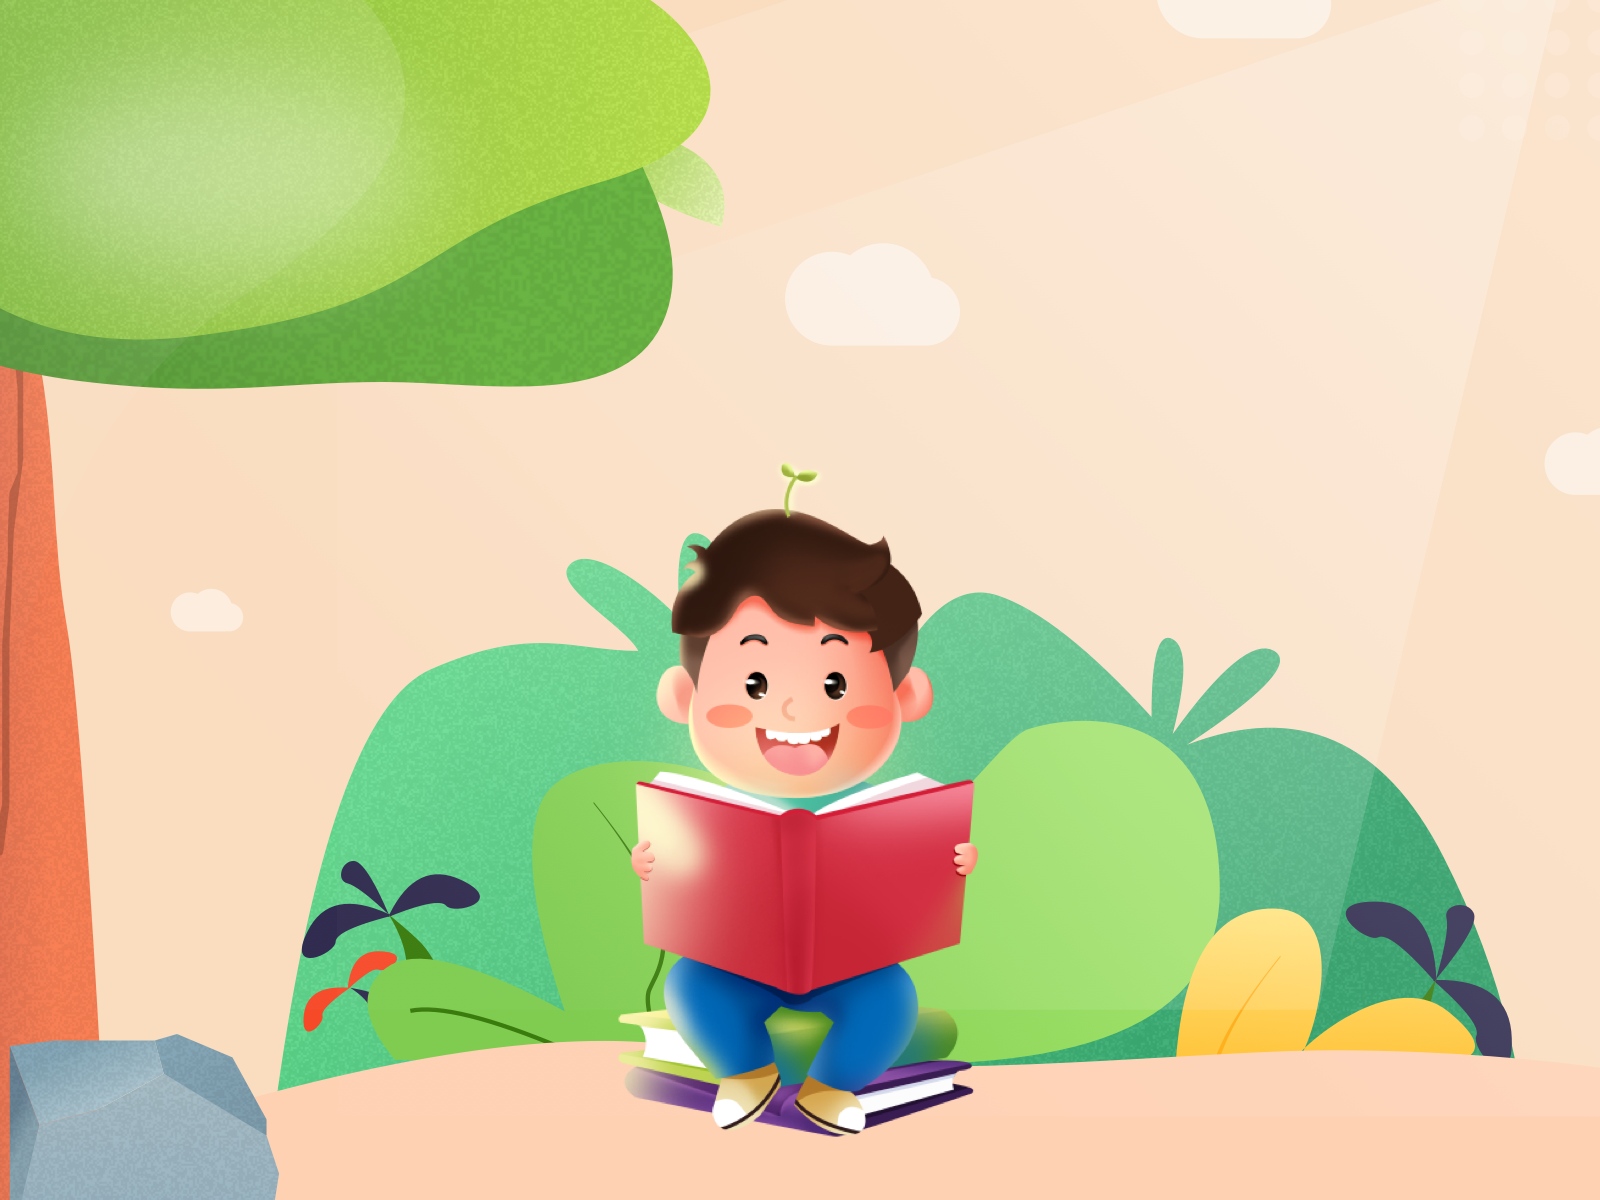 illustrations by Yining on Dribbble